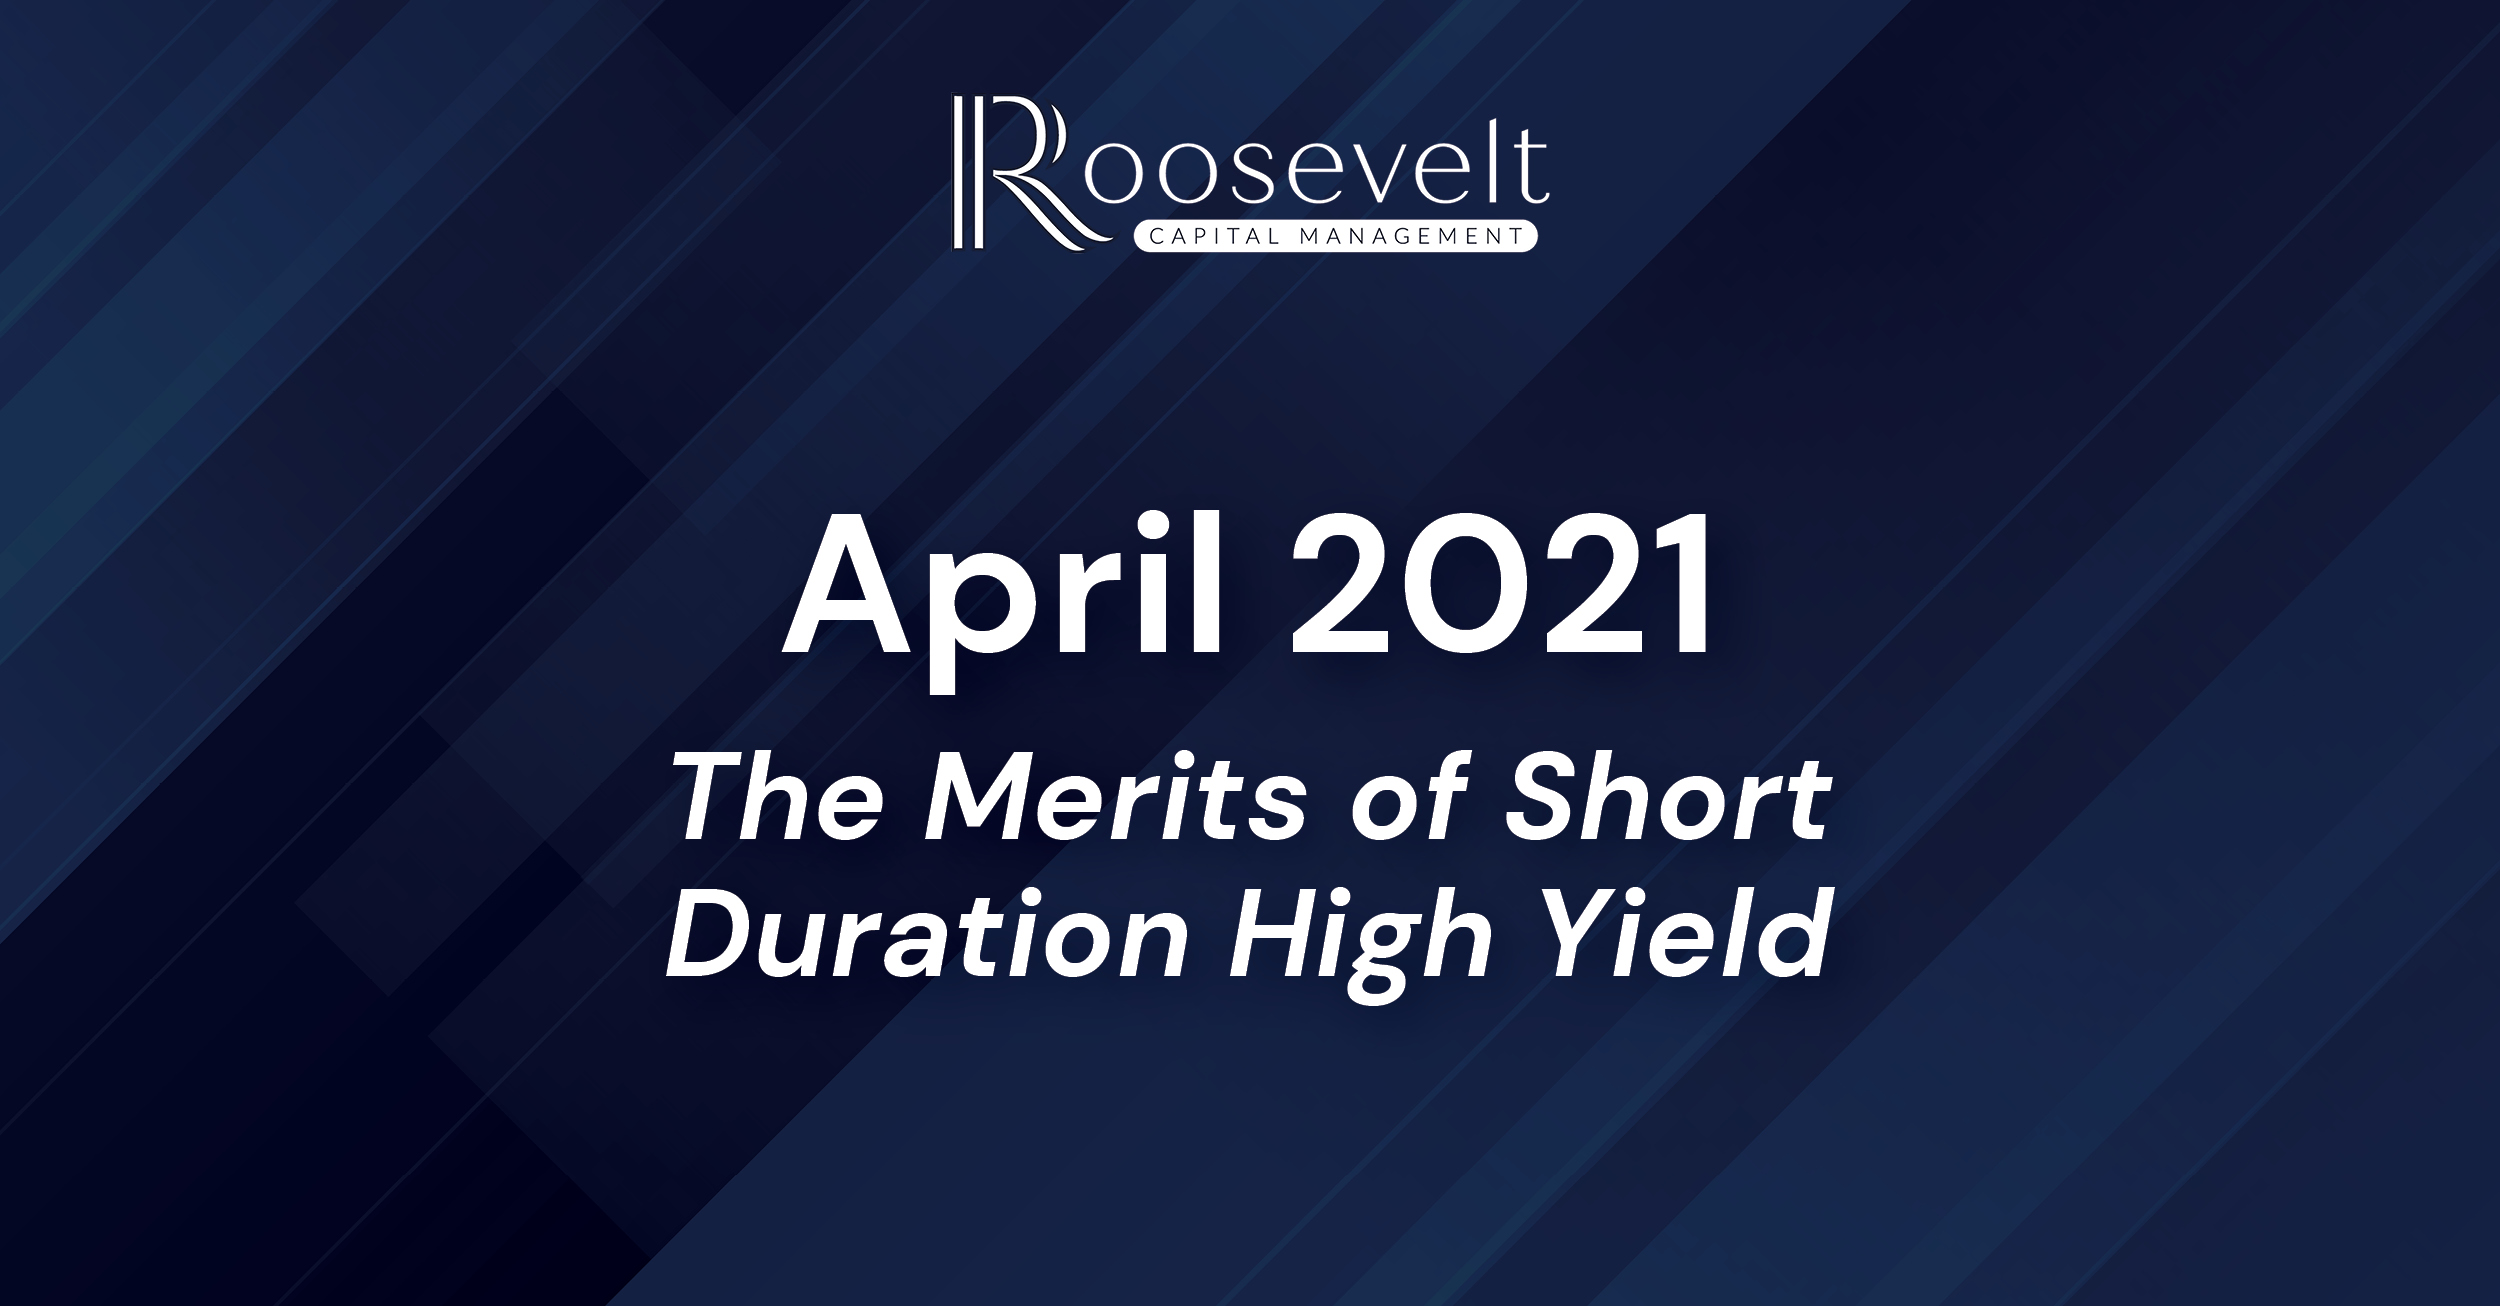 April 2021 - The Merits of Short Duration High Yield in Today’s Investment Climate